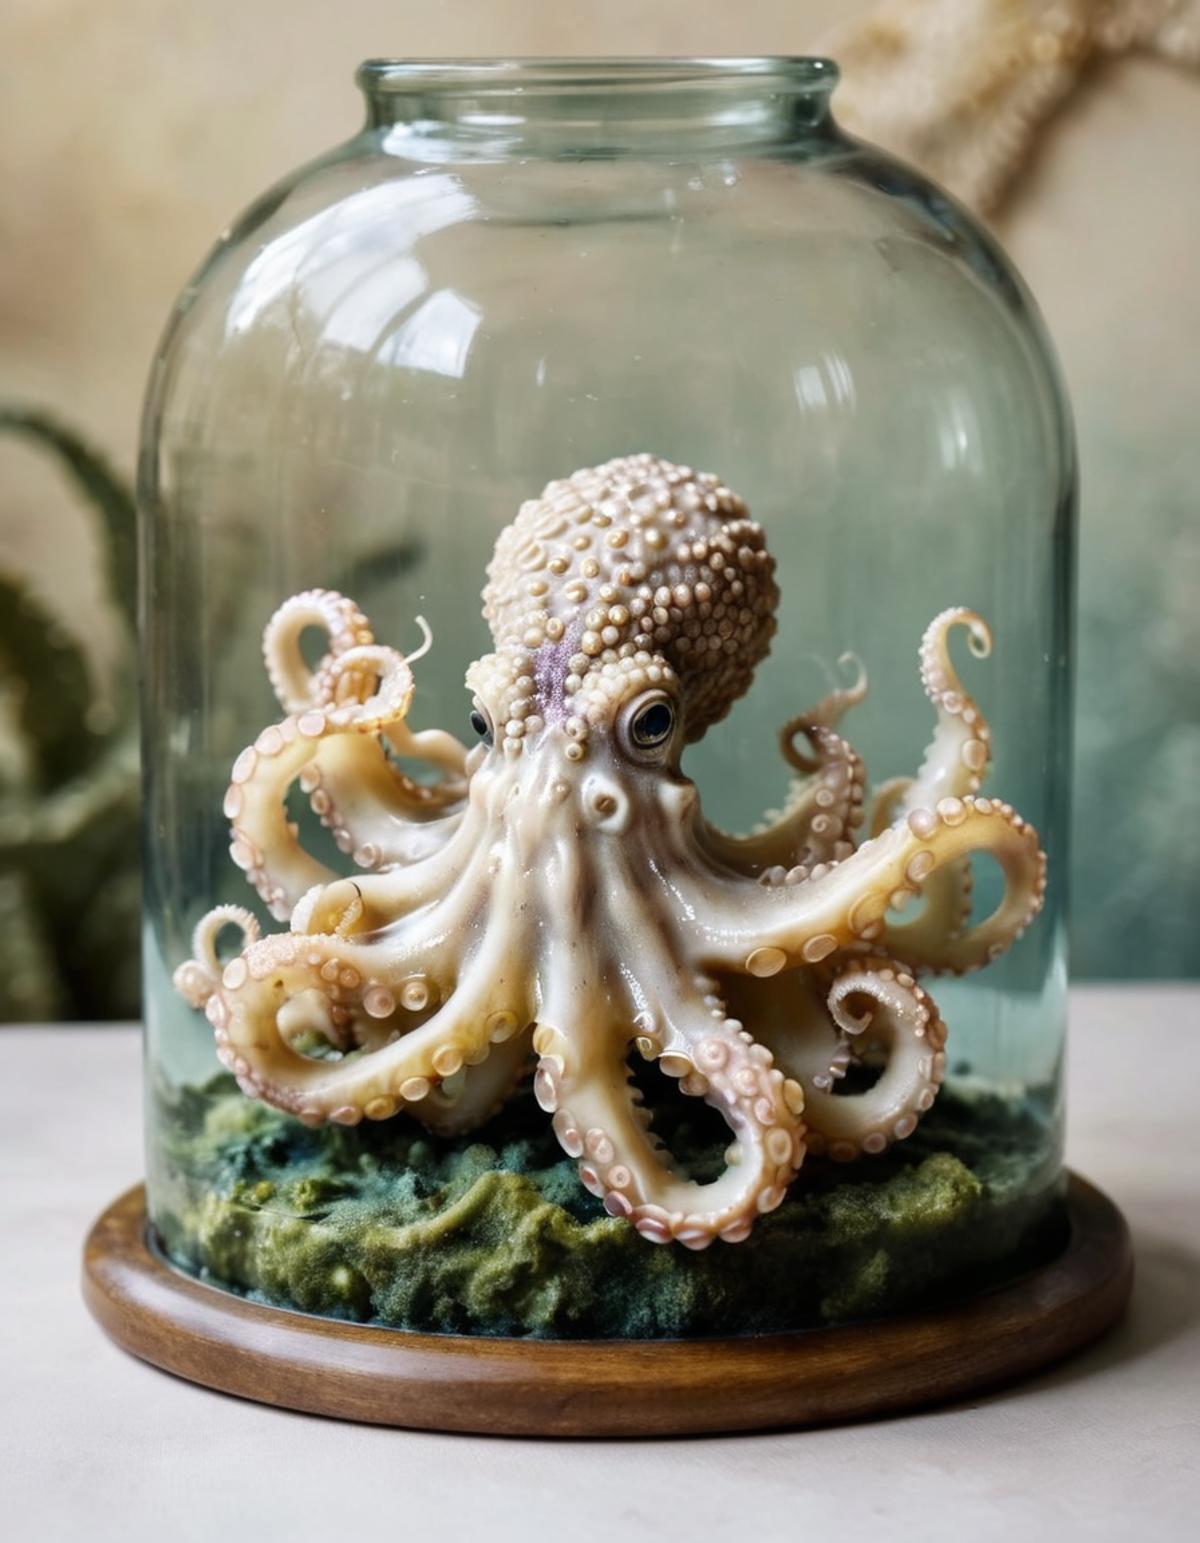 A small white octopus under a glass dome on a table.